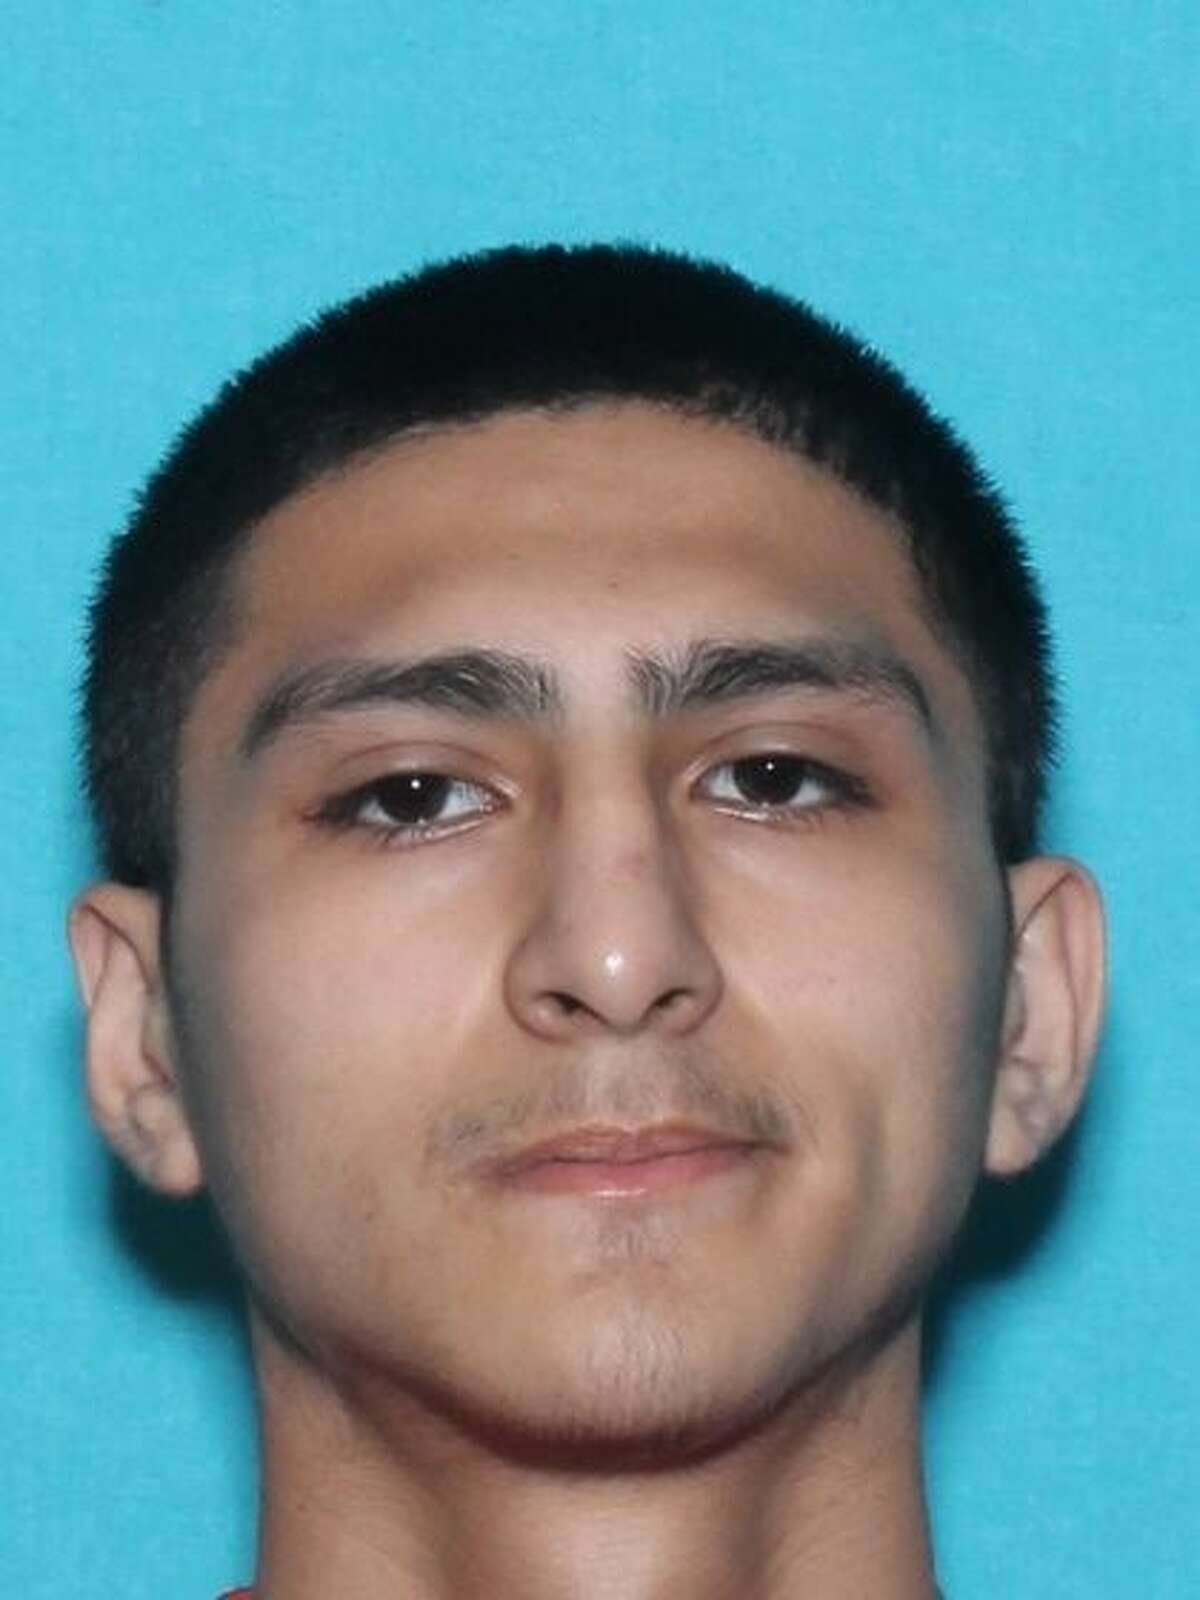 The San Antonio police department has increased the reward money for answers in a 2016 homicide of a 22-year-old man on the Southeast Side. The reward is now $15,000.